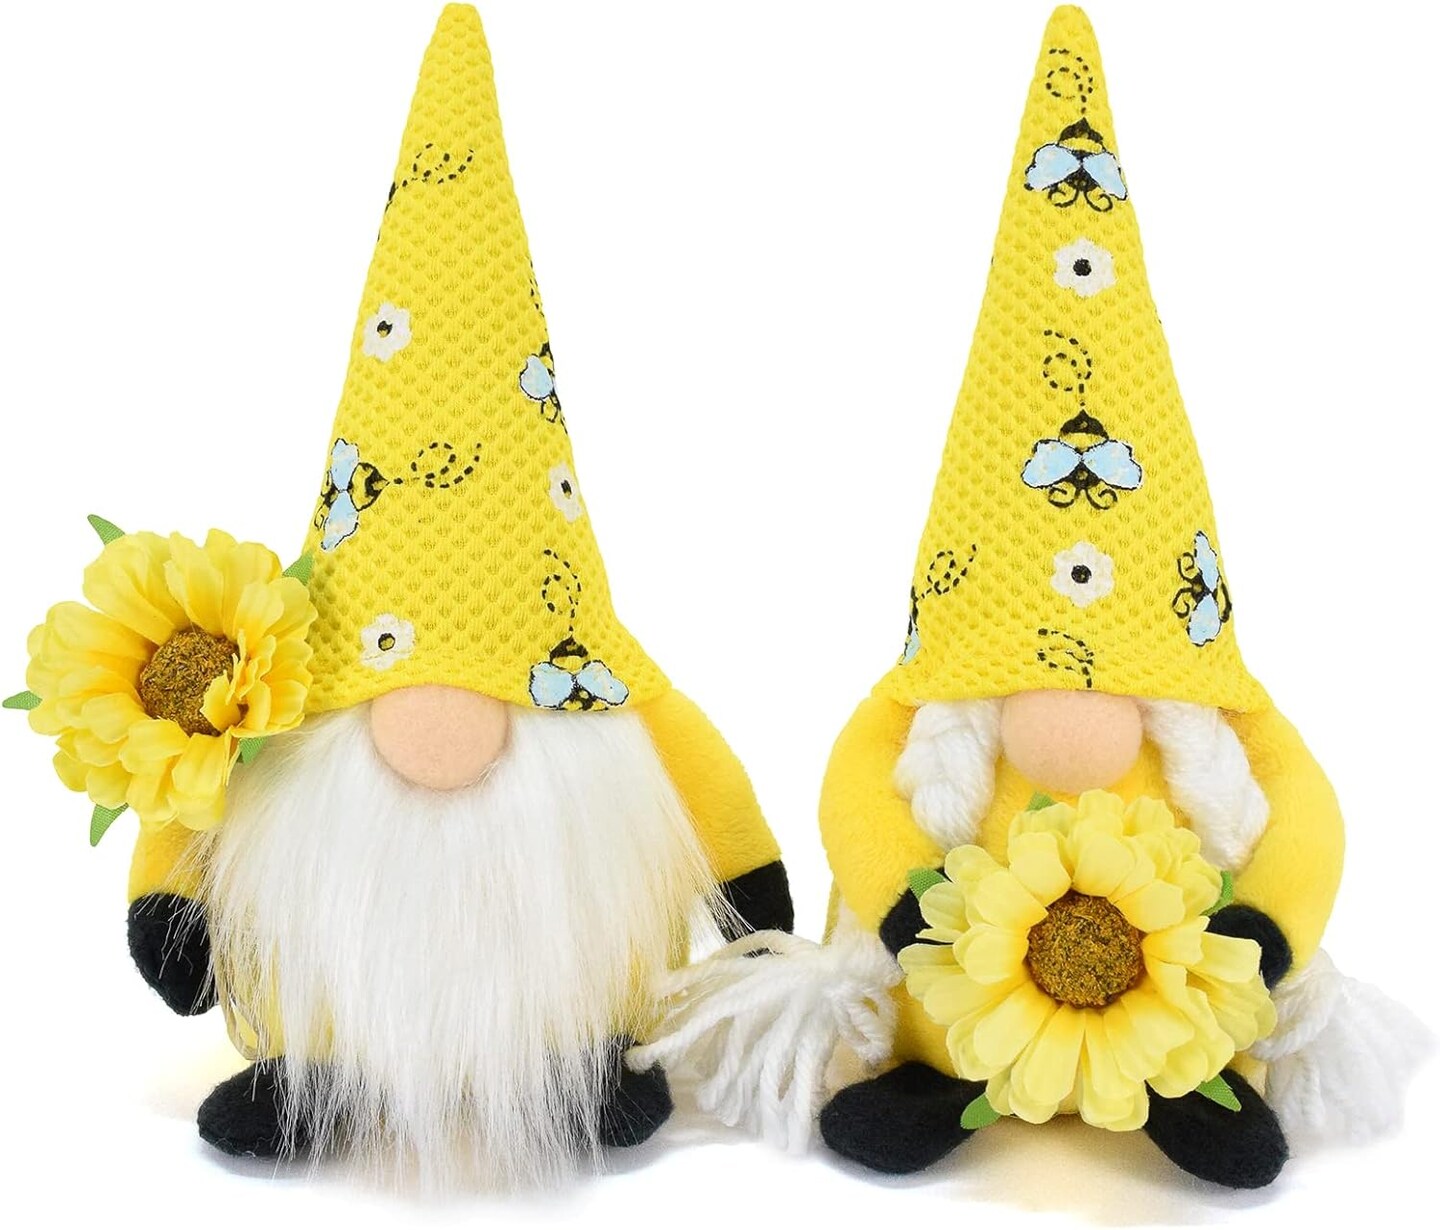 2 Pieces Bumble Bee Gnomes Plush Decorations Swedish Tomte